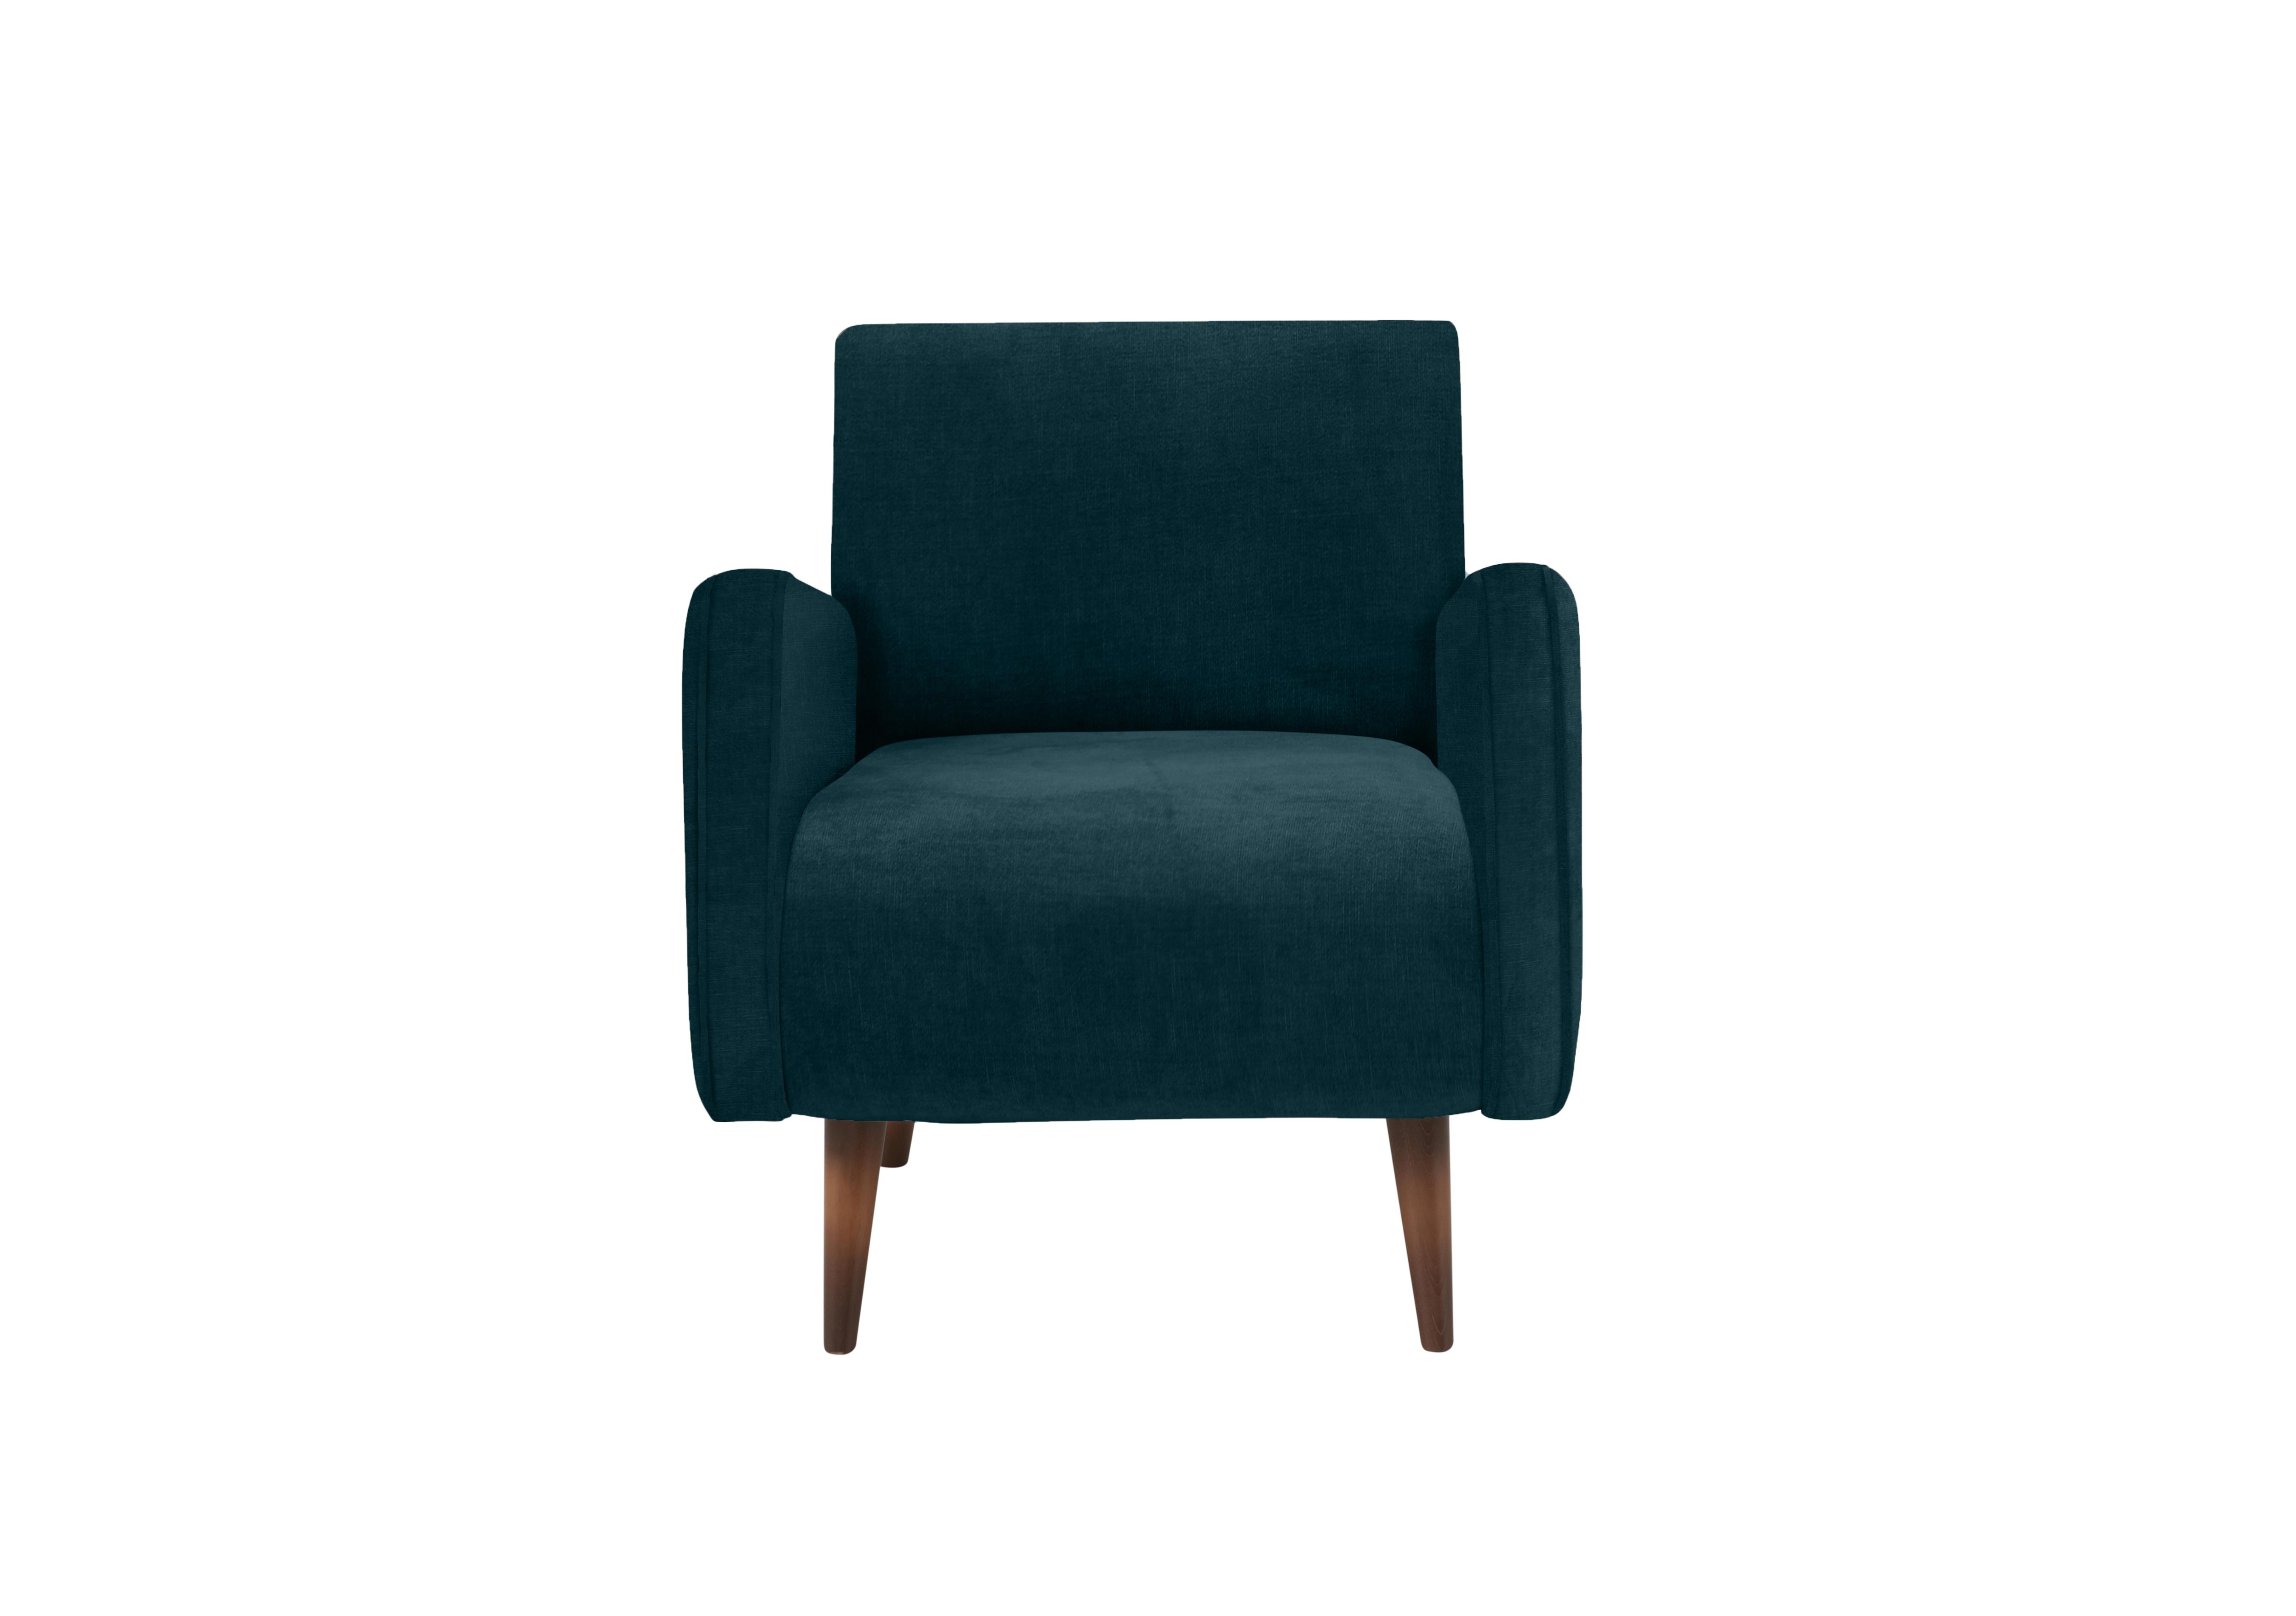 Sumptuous Fabric Accent Chair in Chamonix Teal Dk on Furniture Village